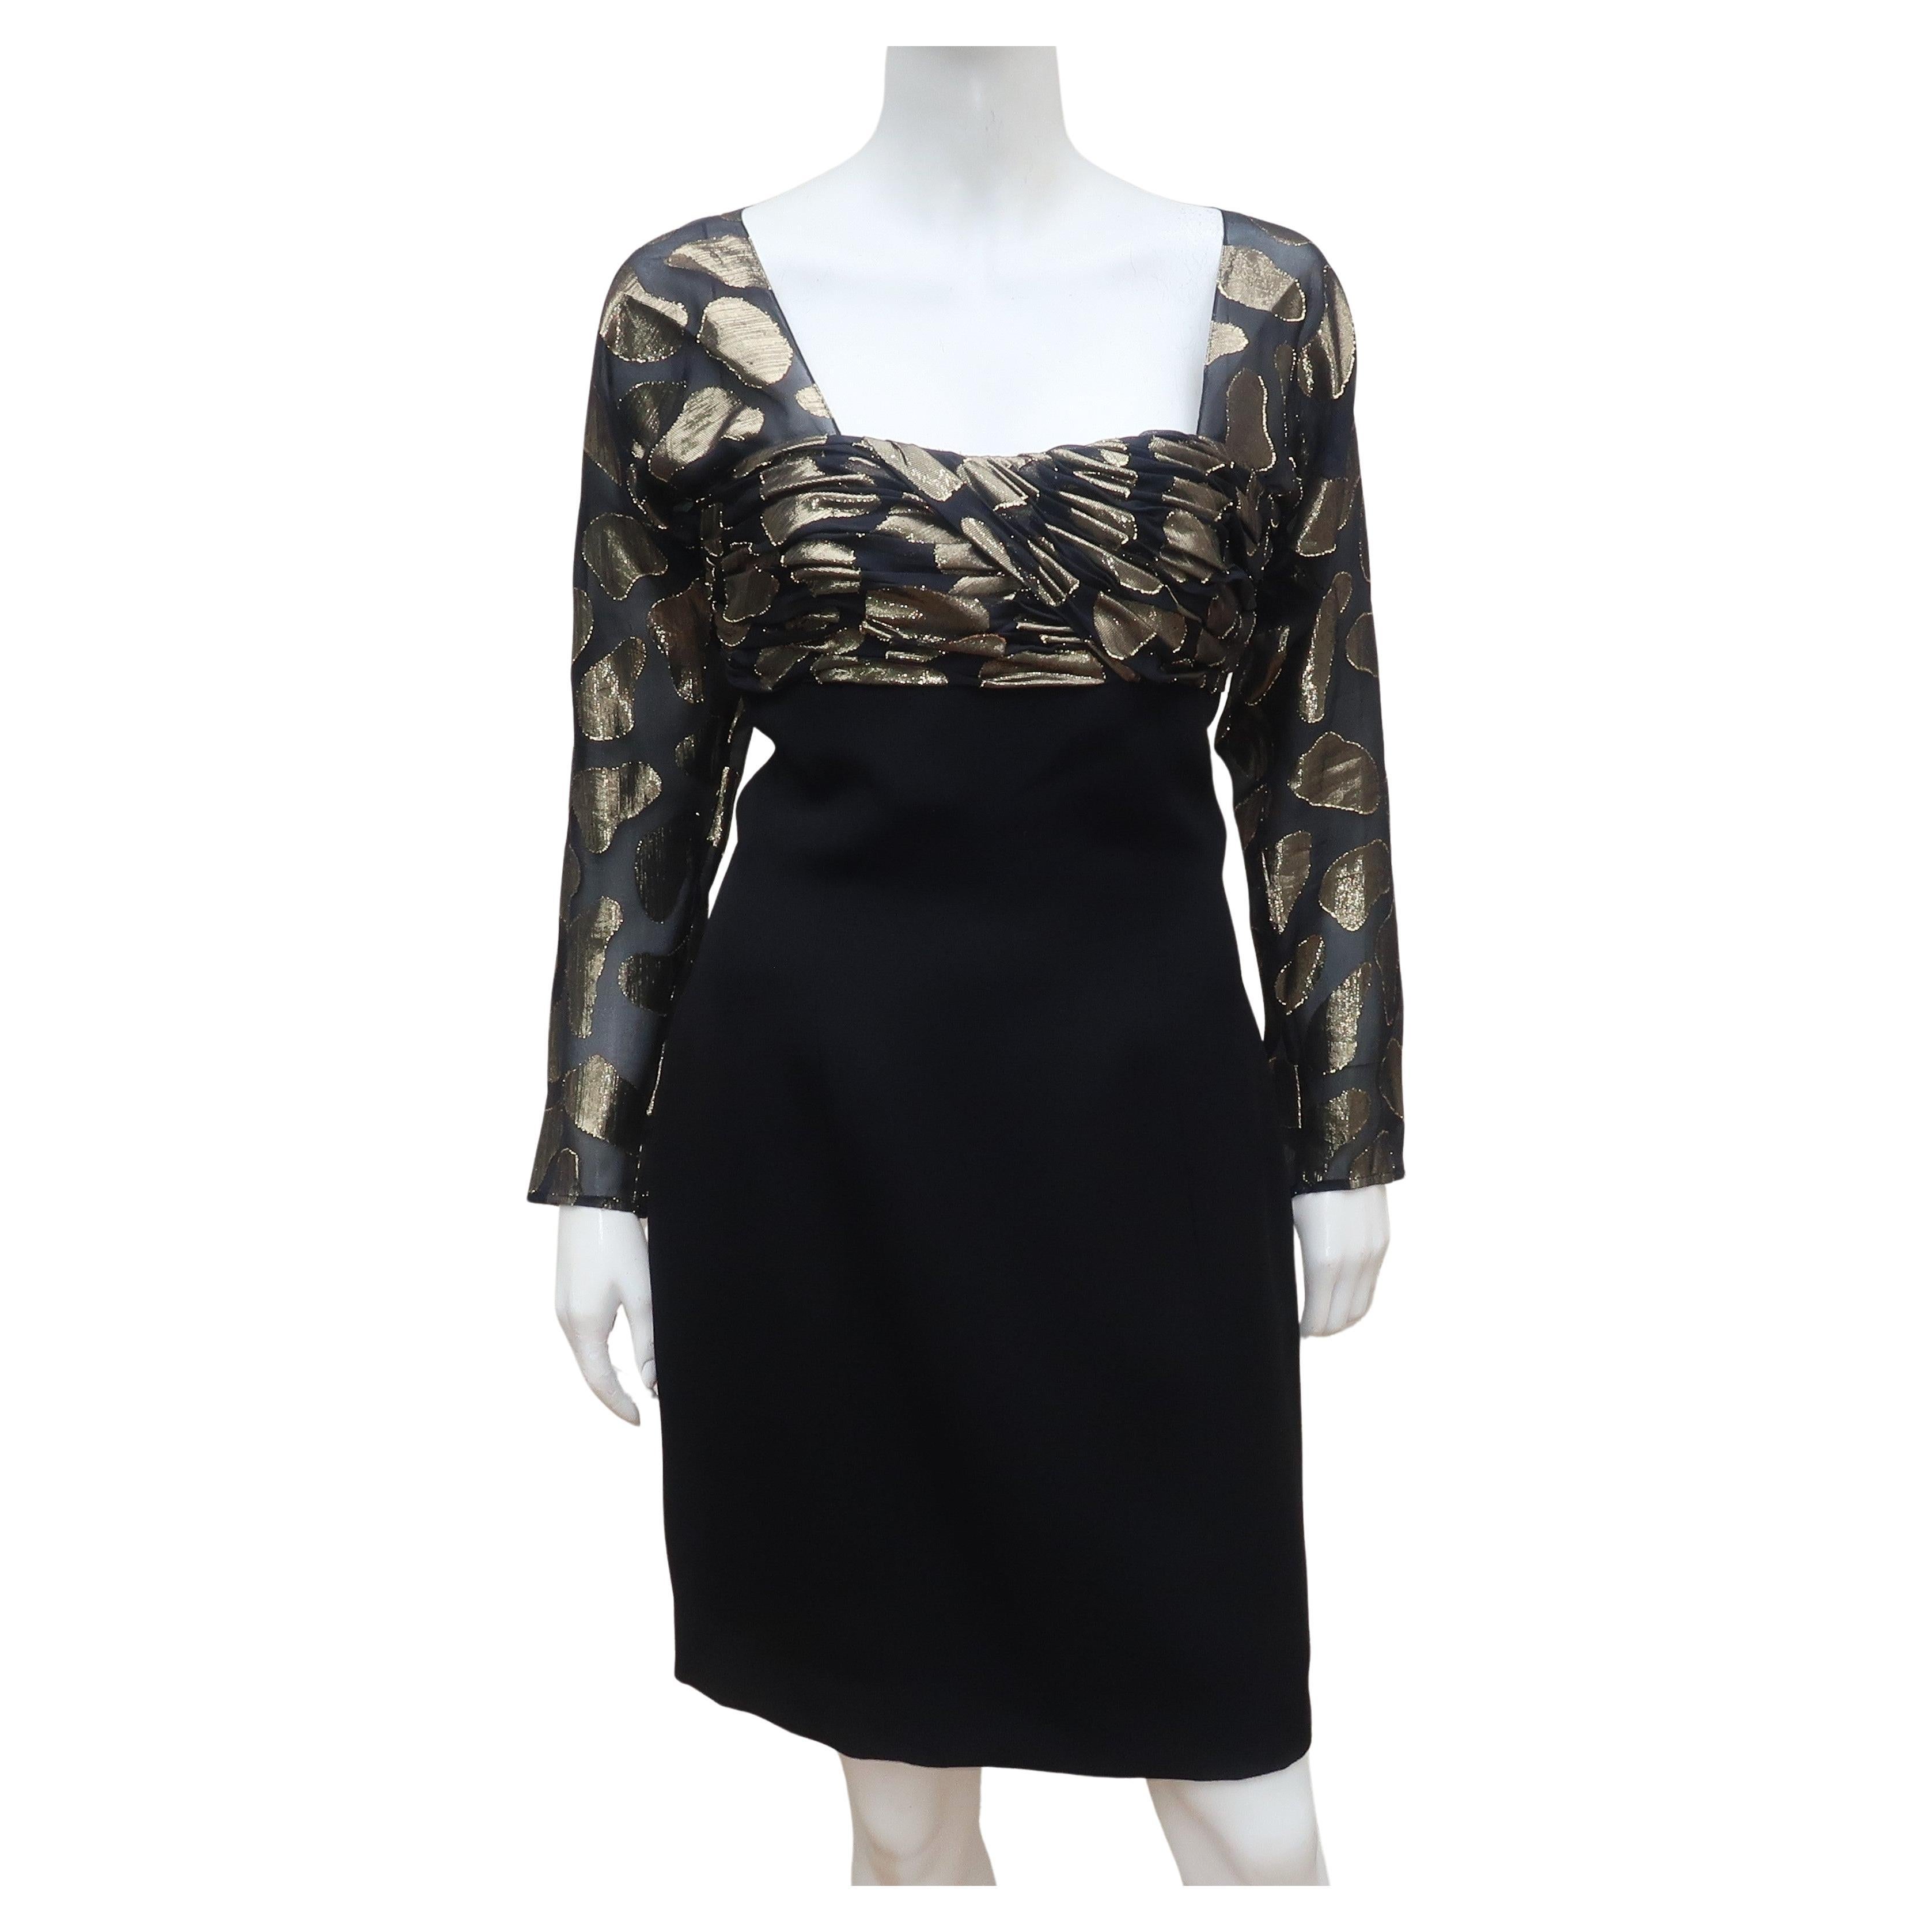 Snooty Hooty Black Crepe & Gold Lamé Cocktail Dress, C.1980 For Sale